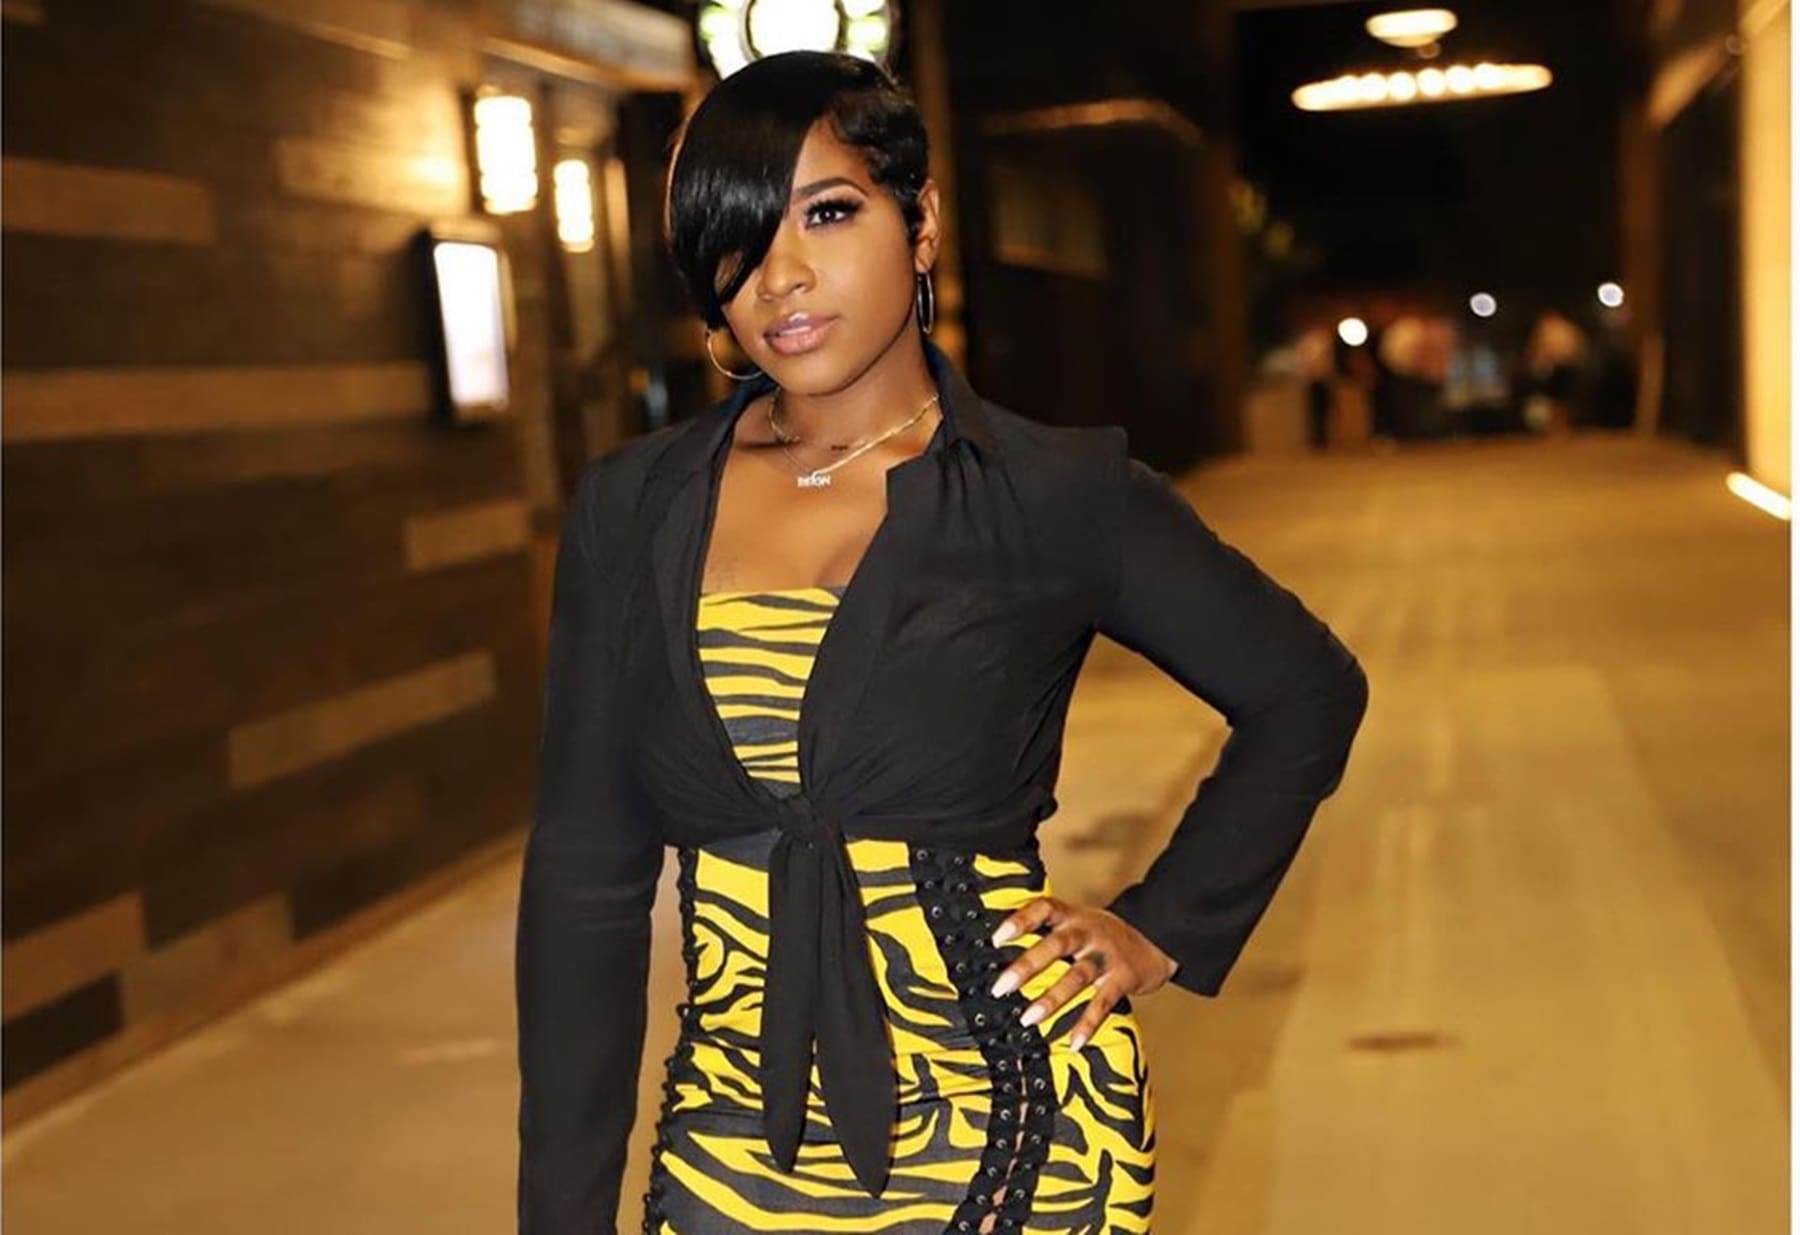 Toya Johnson Asks For Justice In The Case Of George Floyd's Murder